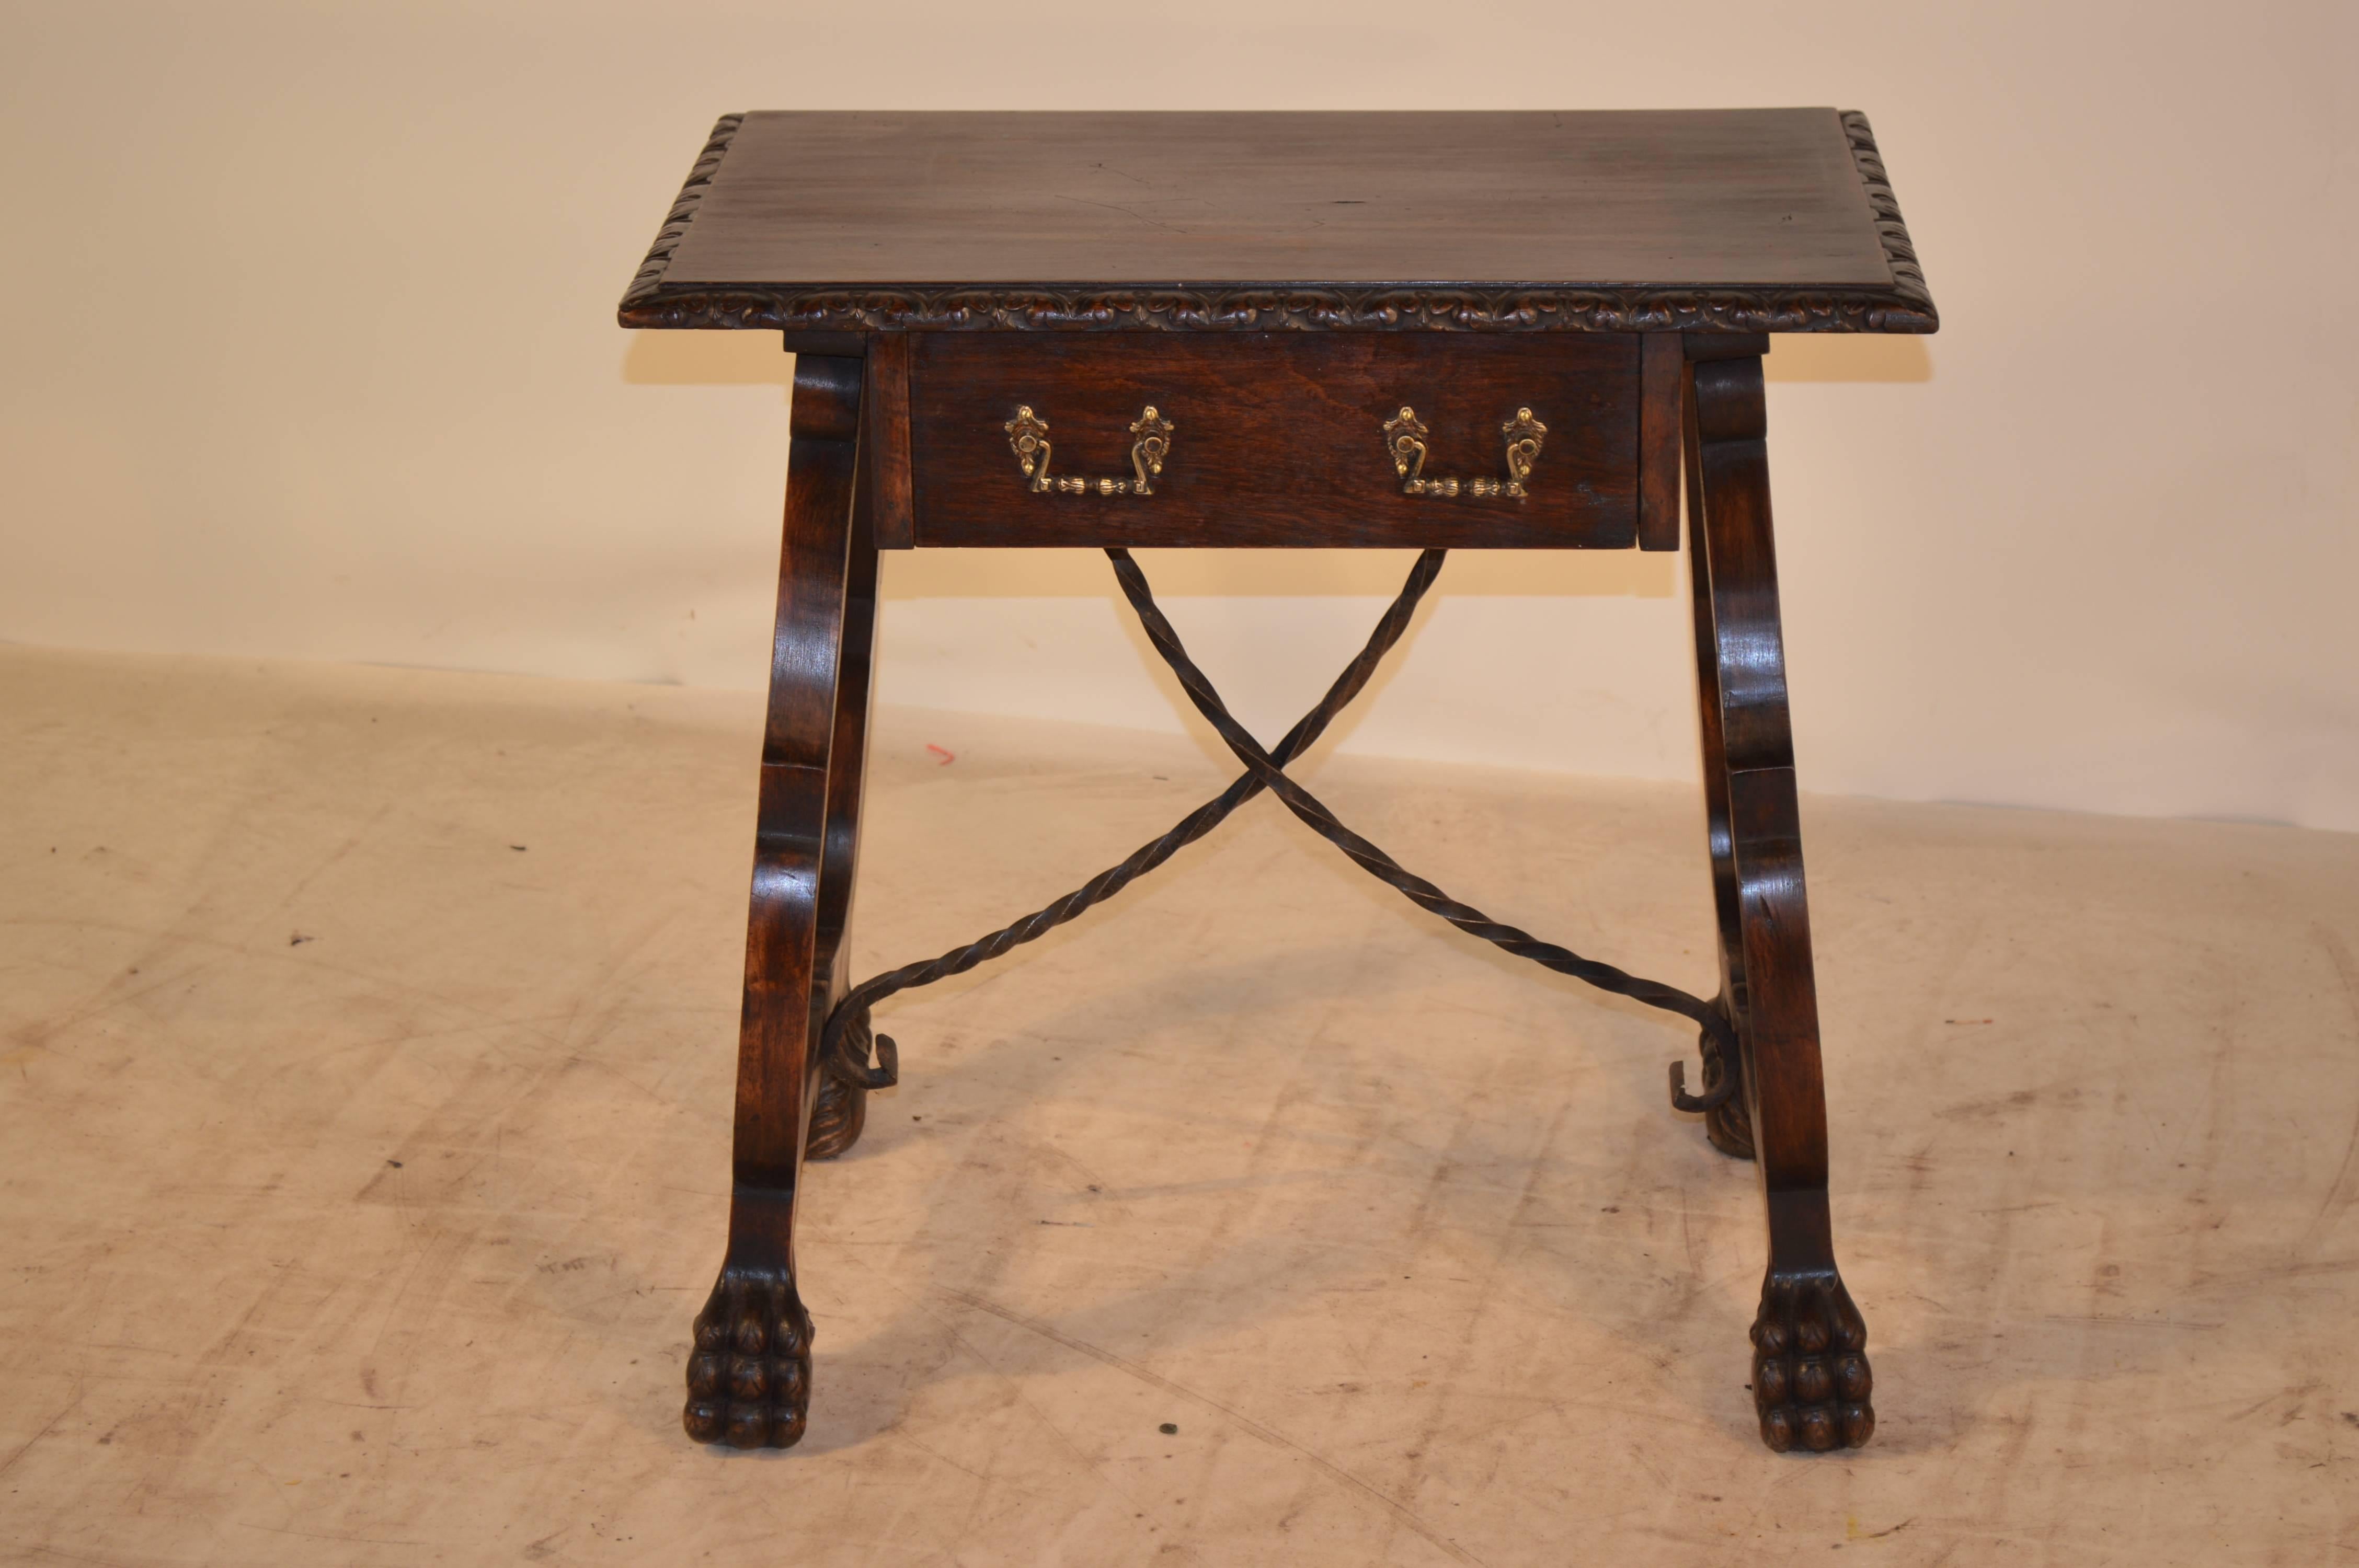 Italian walnut side table with a carved and beveled edge around the top, following down to a single drawer, flanked by Italian vase shaped legs with carved paw feet and hand-wrought iron supports. circa 1900.